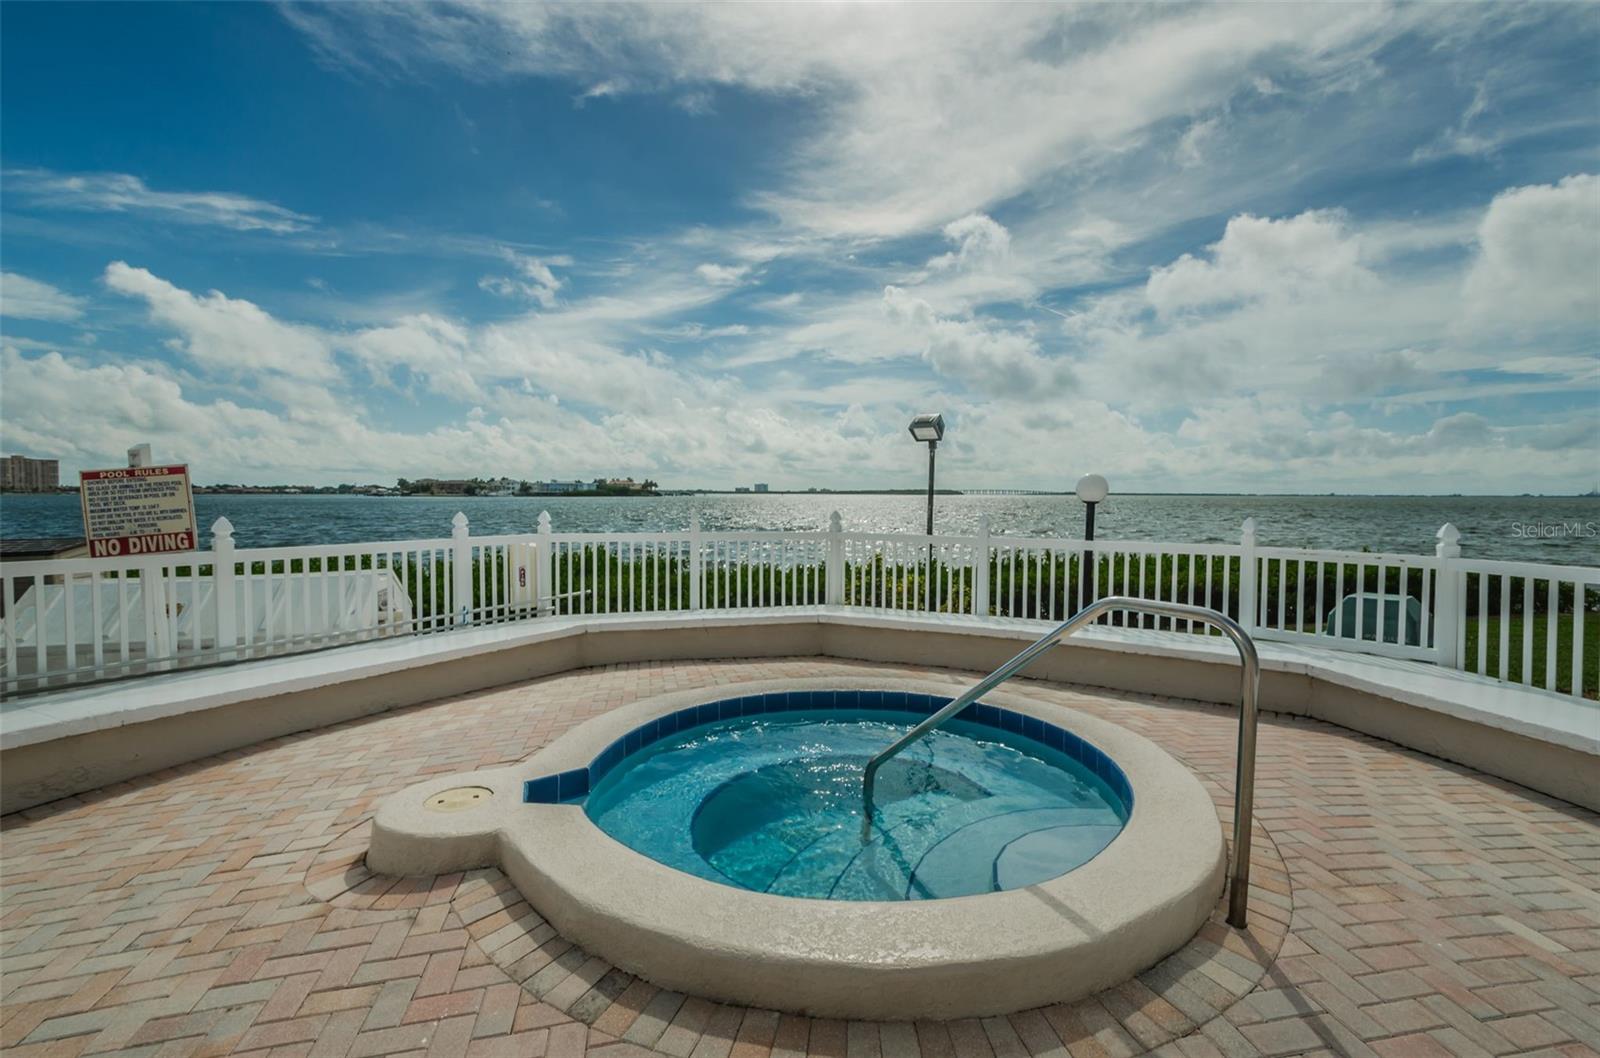 enjoy relaxing in the Hot tub overlooking the Intracoastal waterway